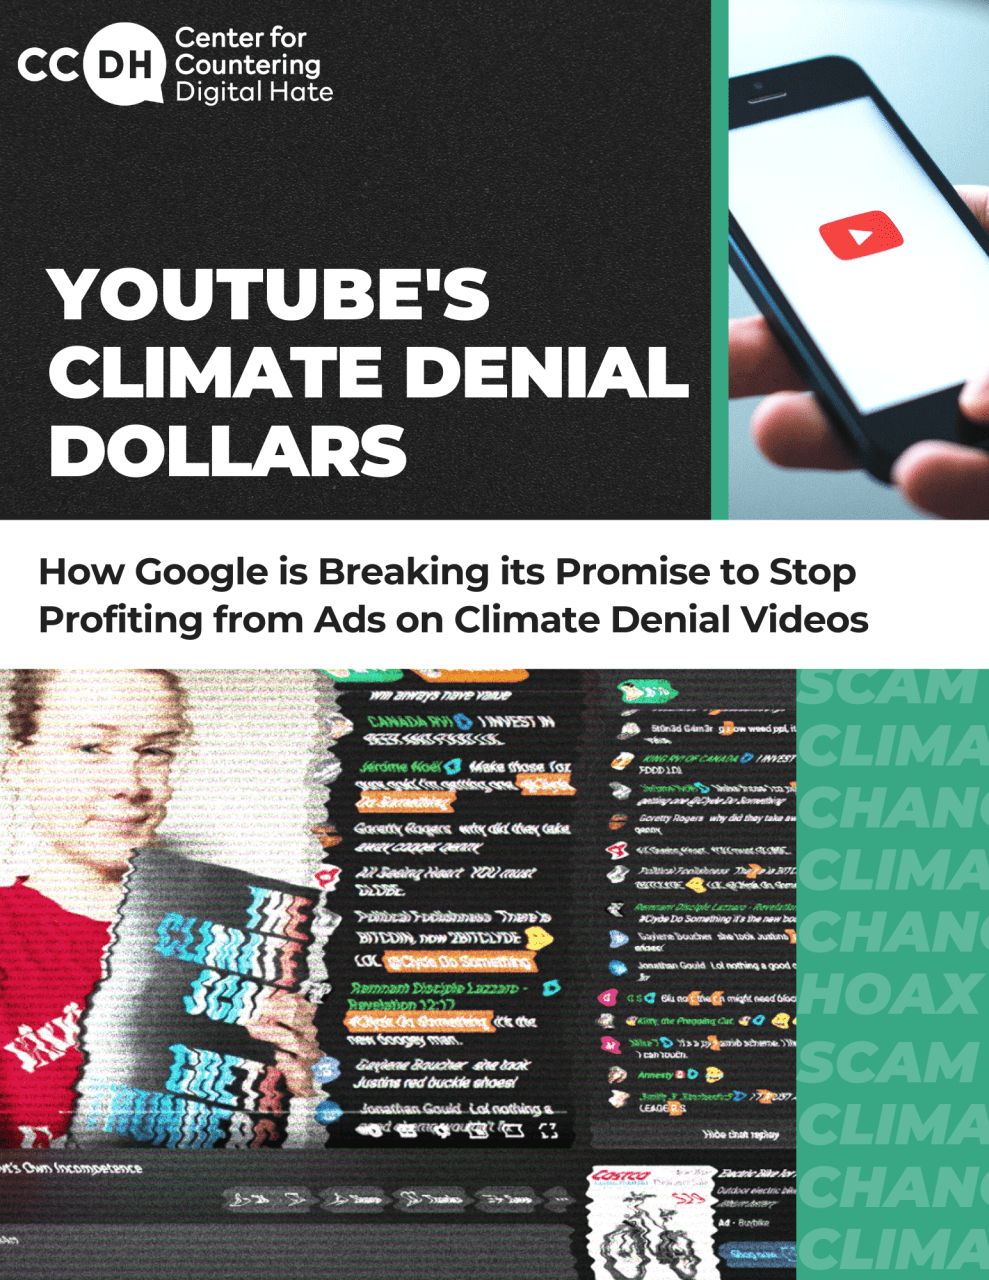 YouTube's Climate Denial Dollar's research cover